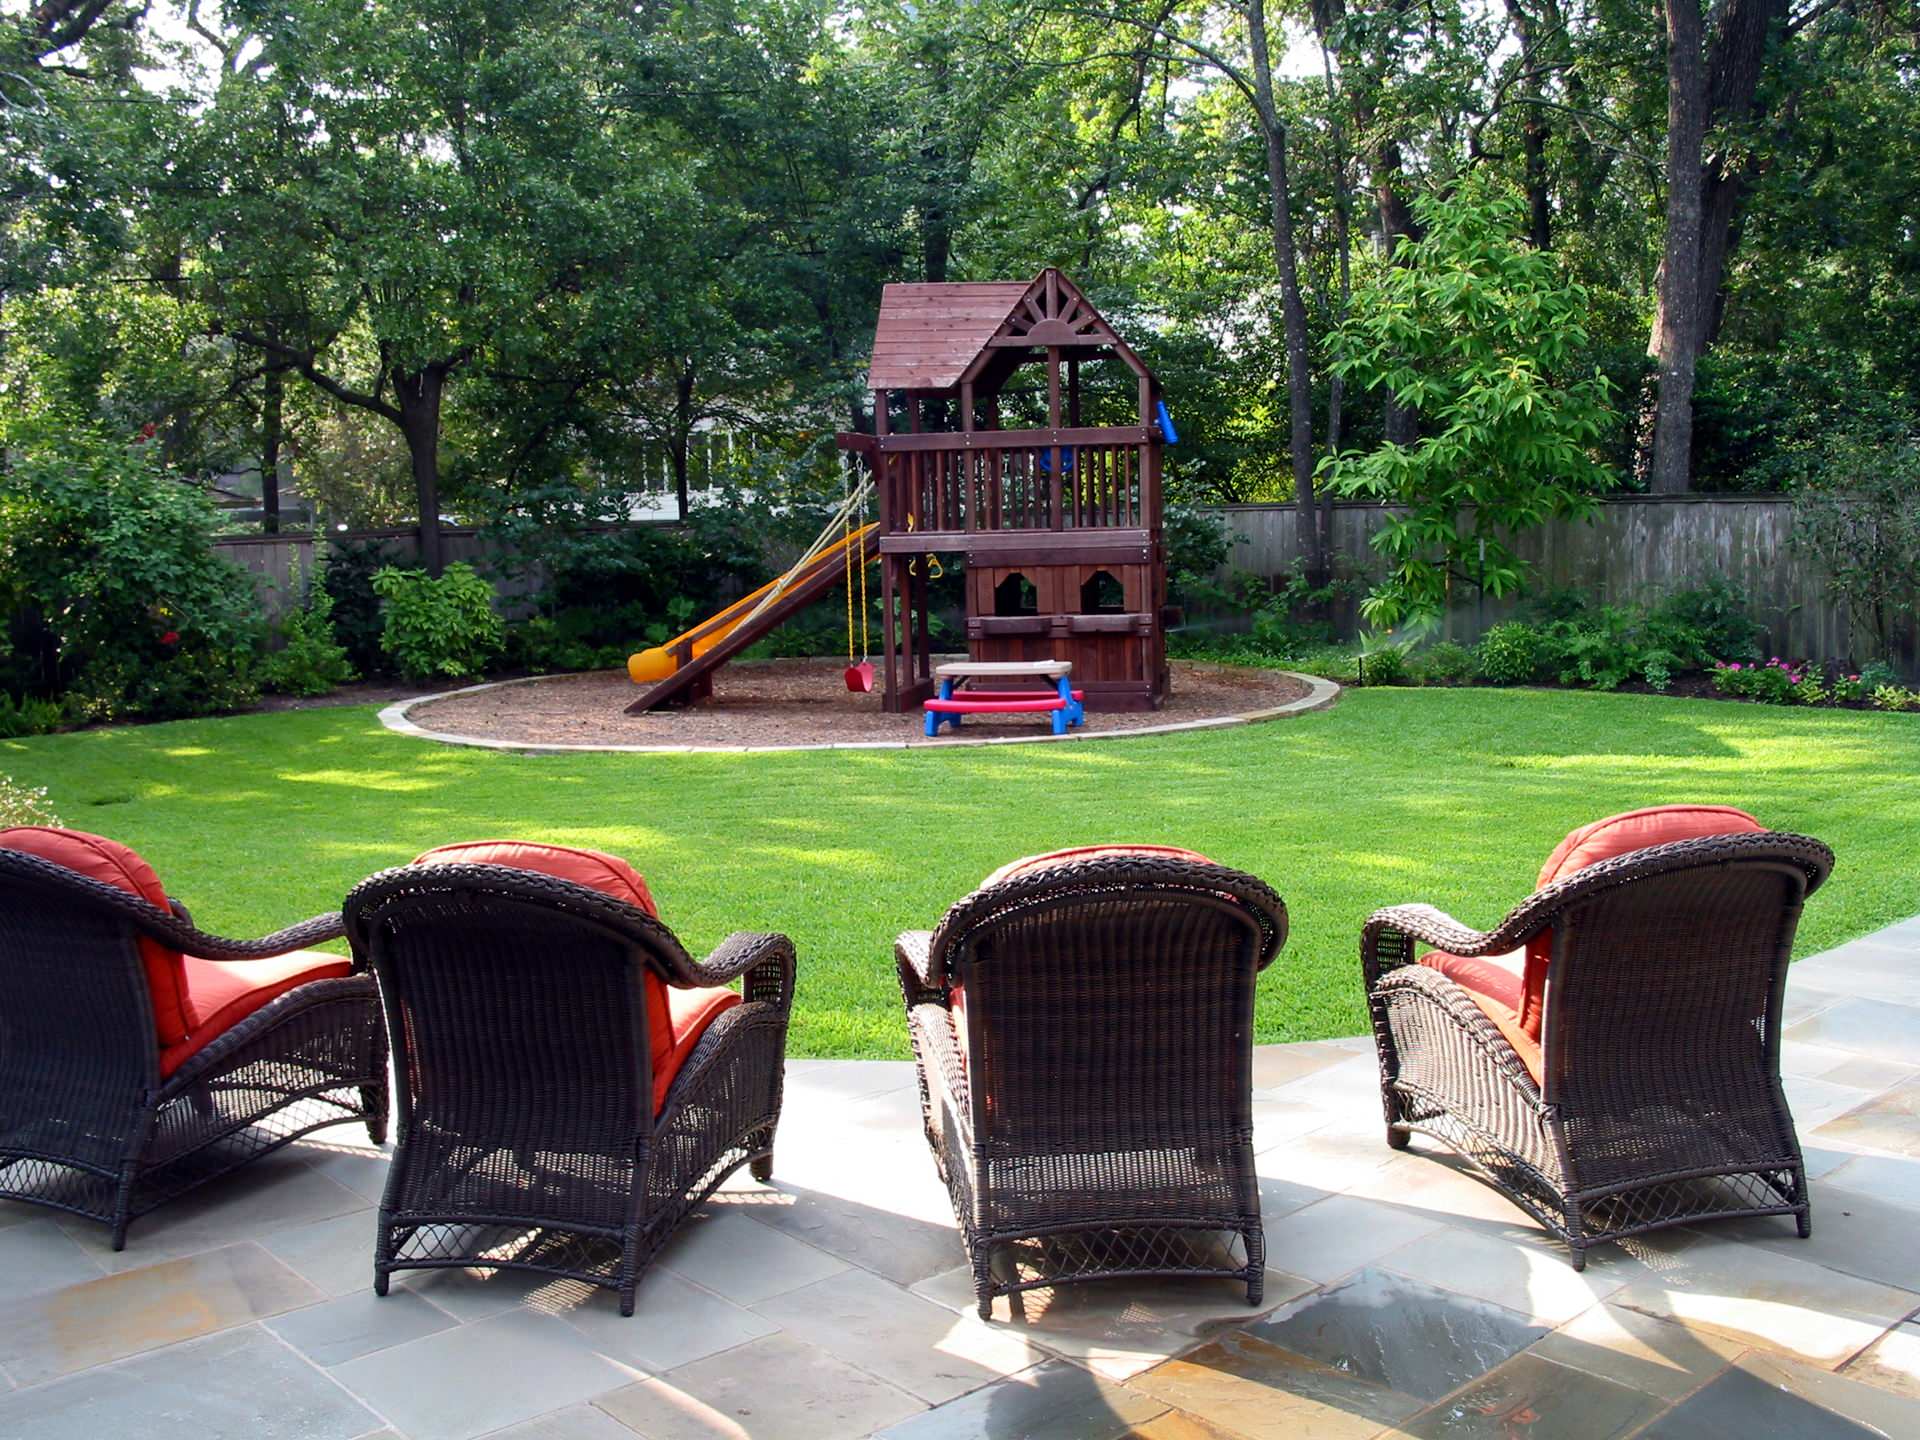 Relax-and-keep-an-eye-on-the-little-ones-as-they-enjoy-the-outdoors-93774